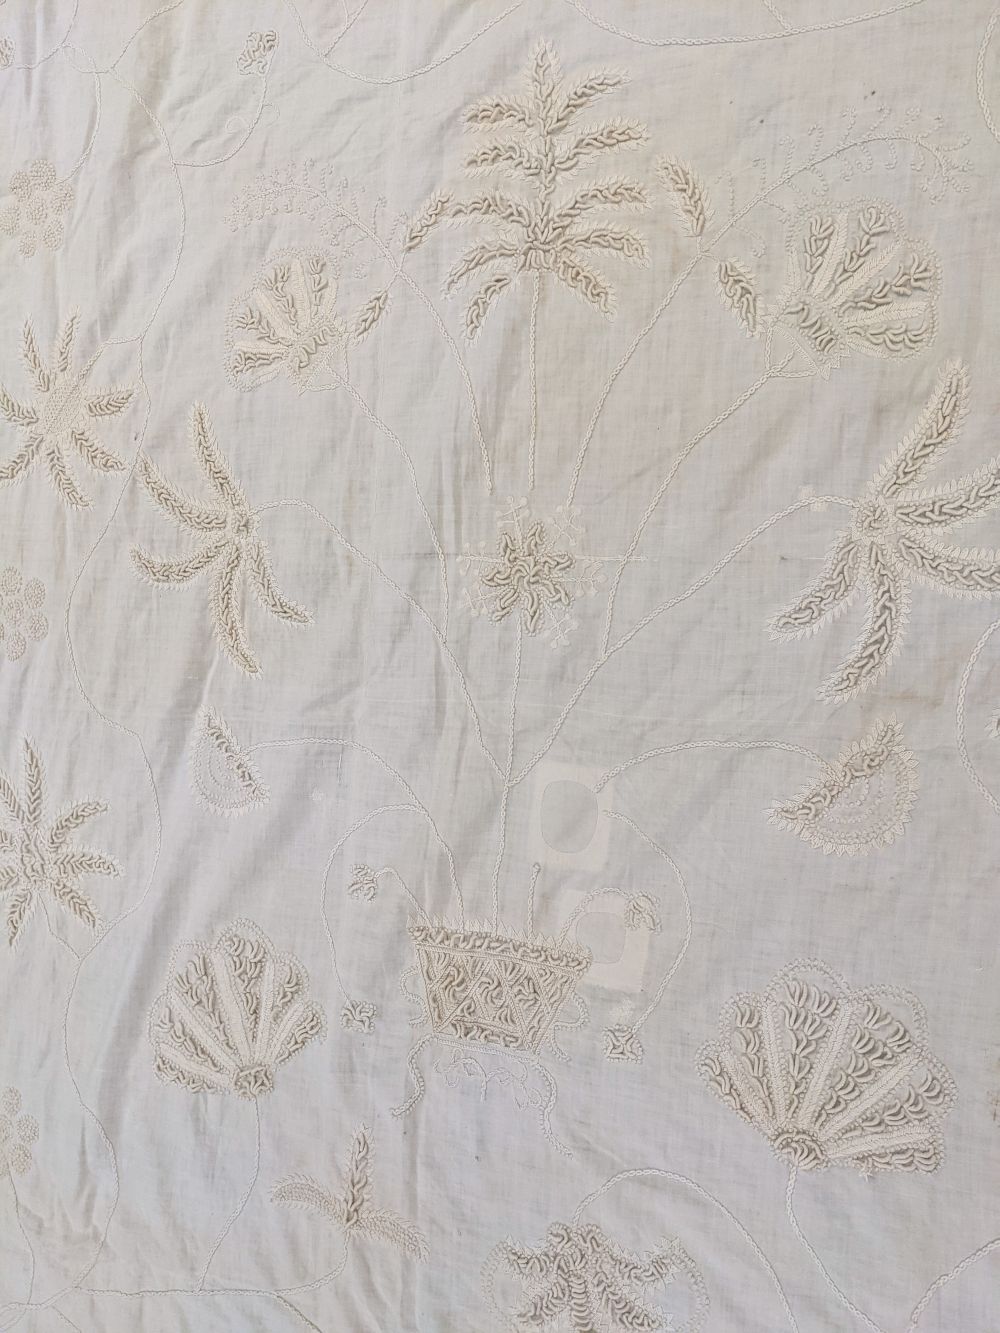 * Embroidered bedcover. A bullion-work coverlet, English, early 19th century - Image 9 of 16